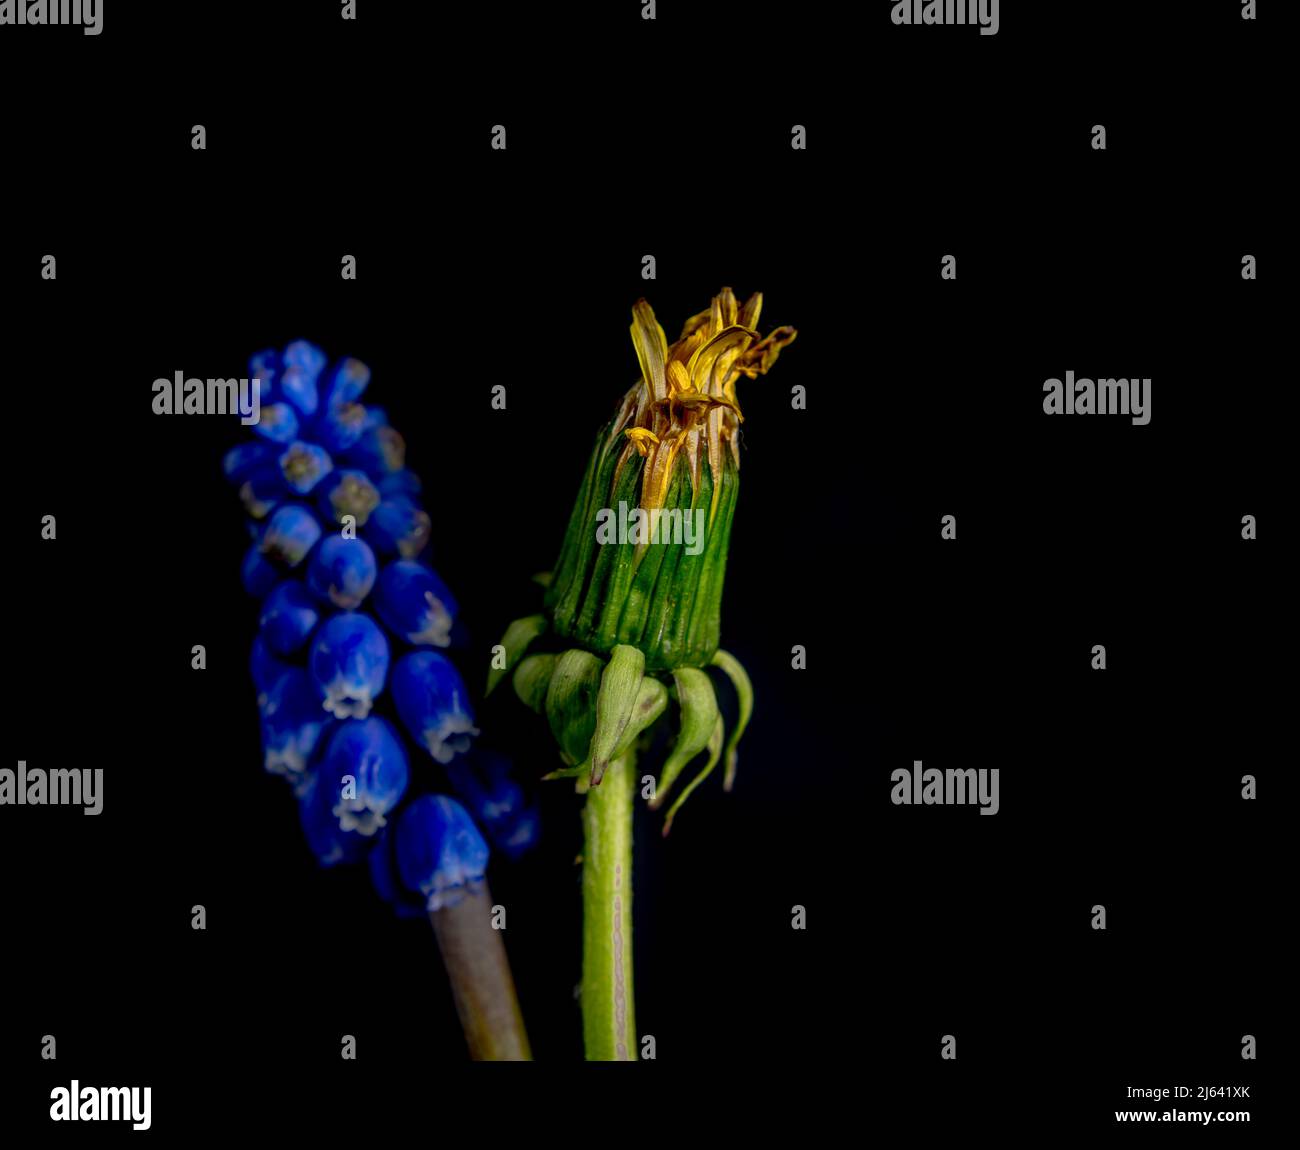 Blue Spike and Dandelion flowers blooms with black color background Stock Photo